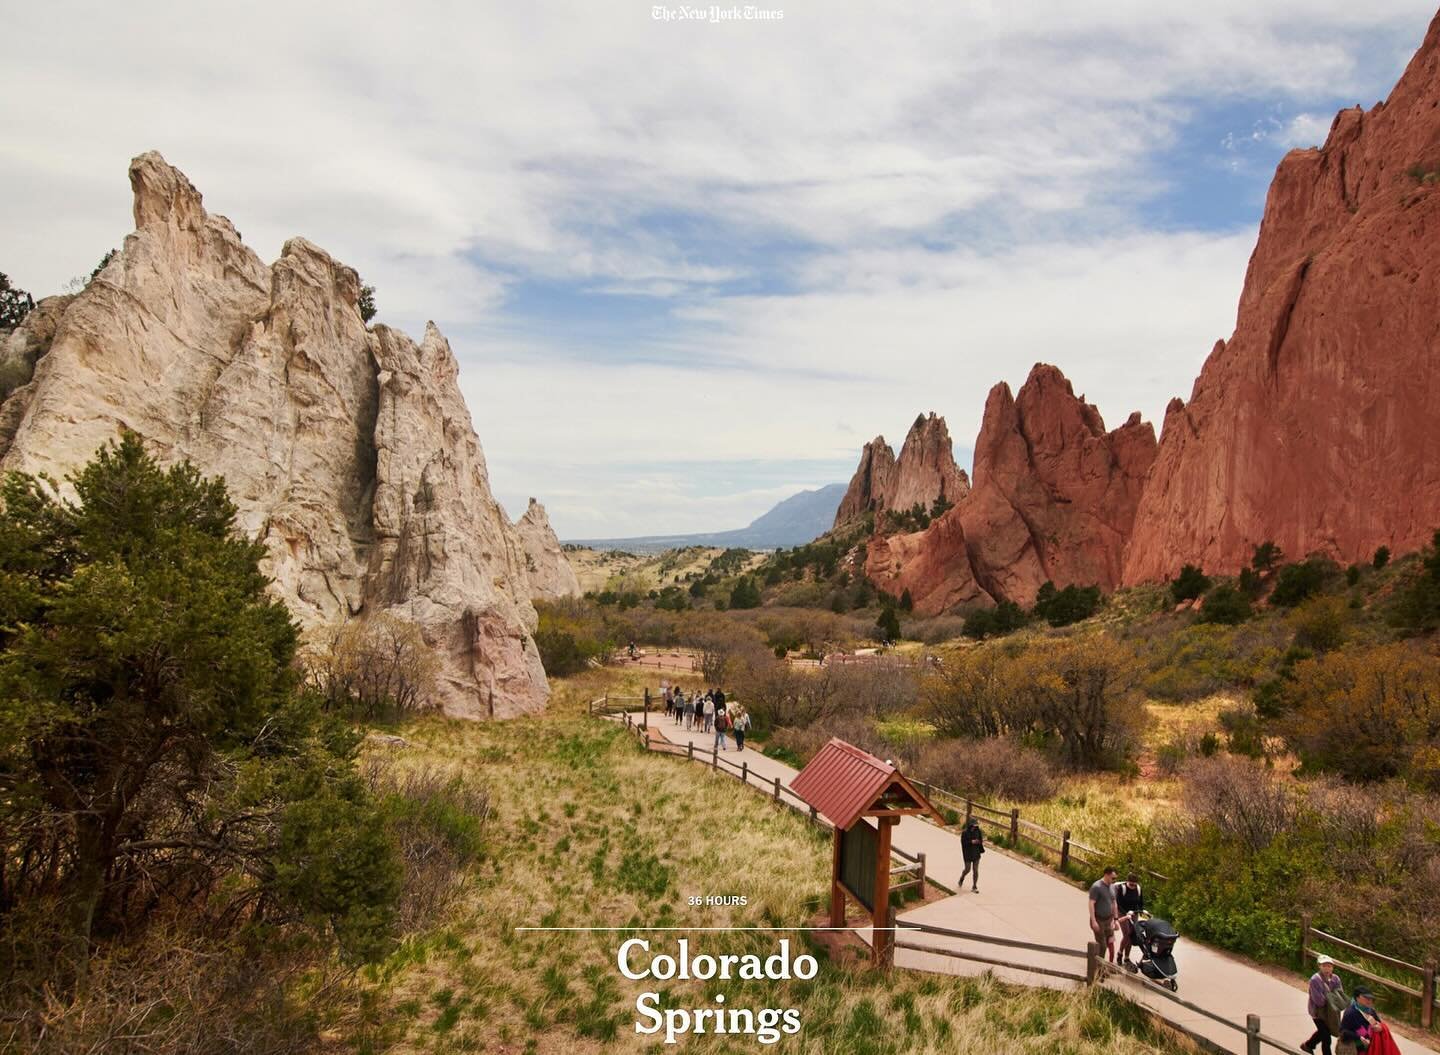 If you can&rsquo;t make it to Paris for the summer Olympics, Colorado Springs (aka Olympic City USA) is a great domestic spot to explore the history and excitement of the Olympic Games alongside gorgeous outdoor adventures and delicious food and drin